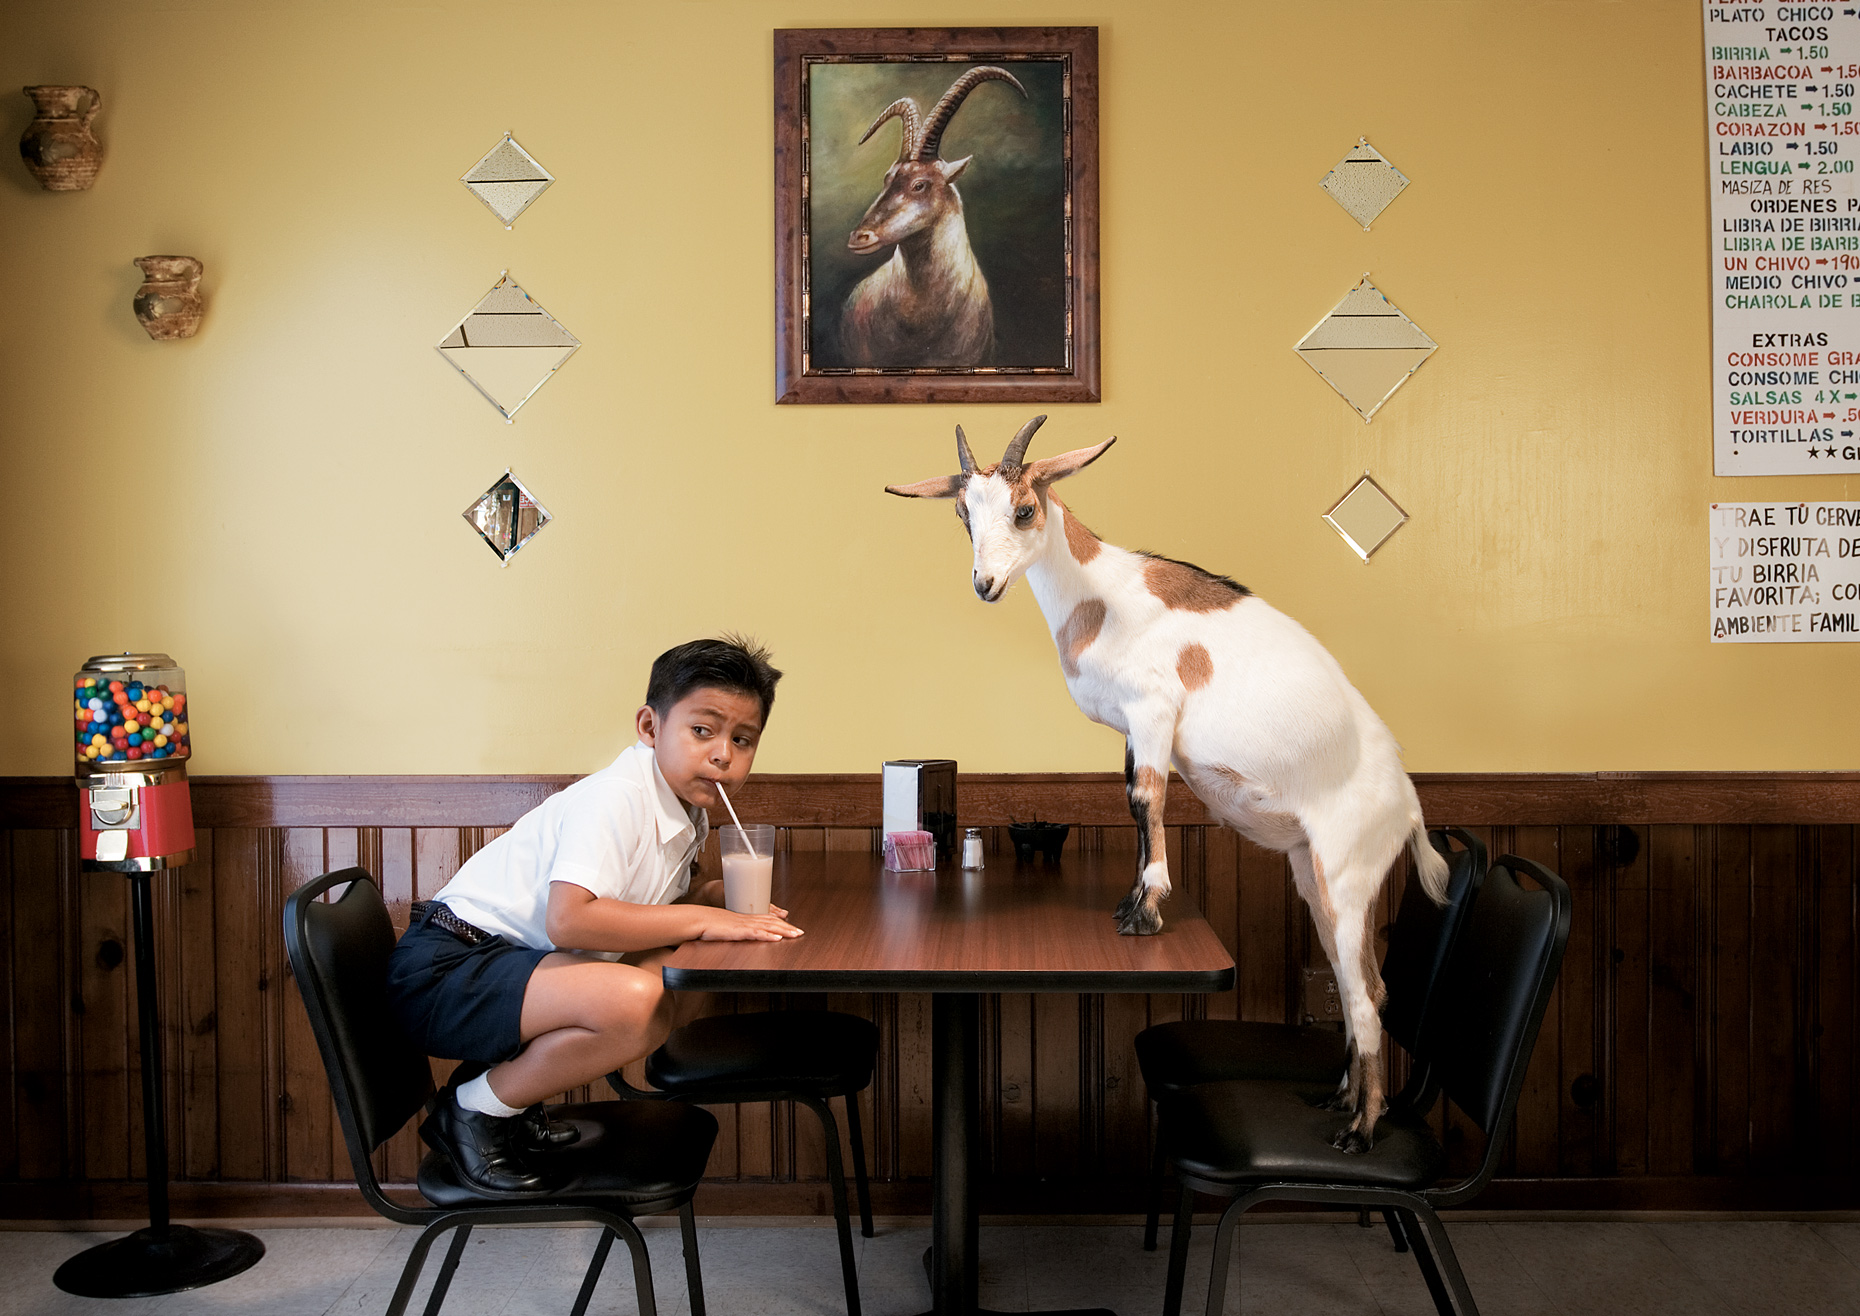 Boy with goat at a restaurant | Conceptual image by Saverio Truglia